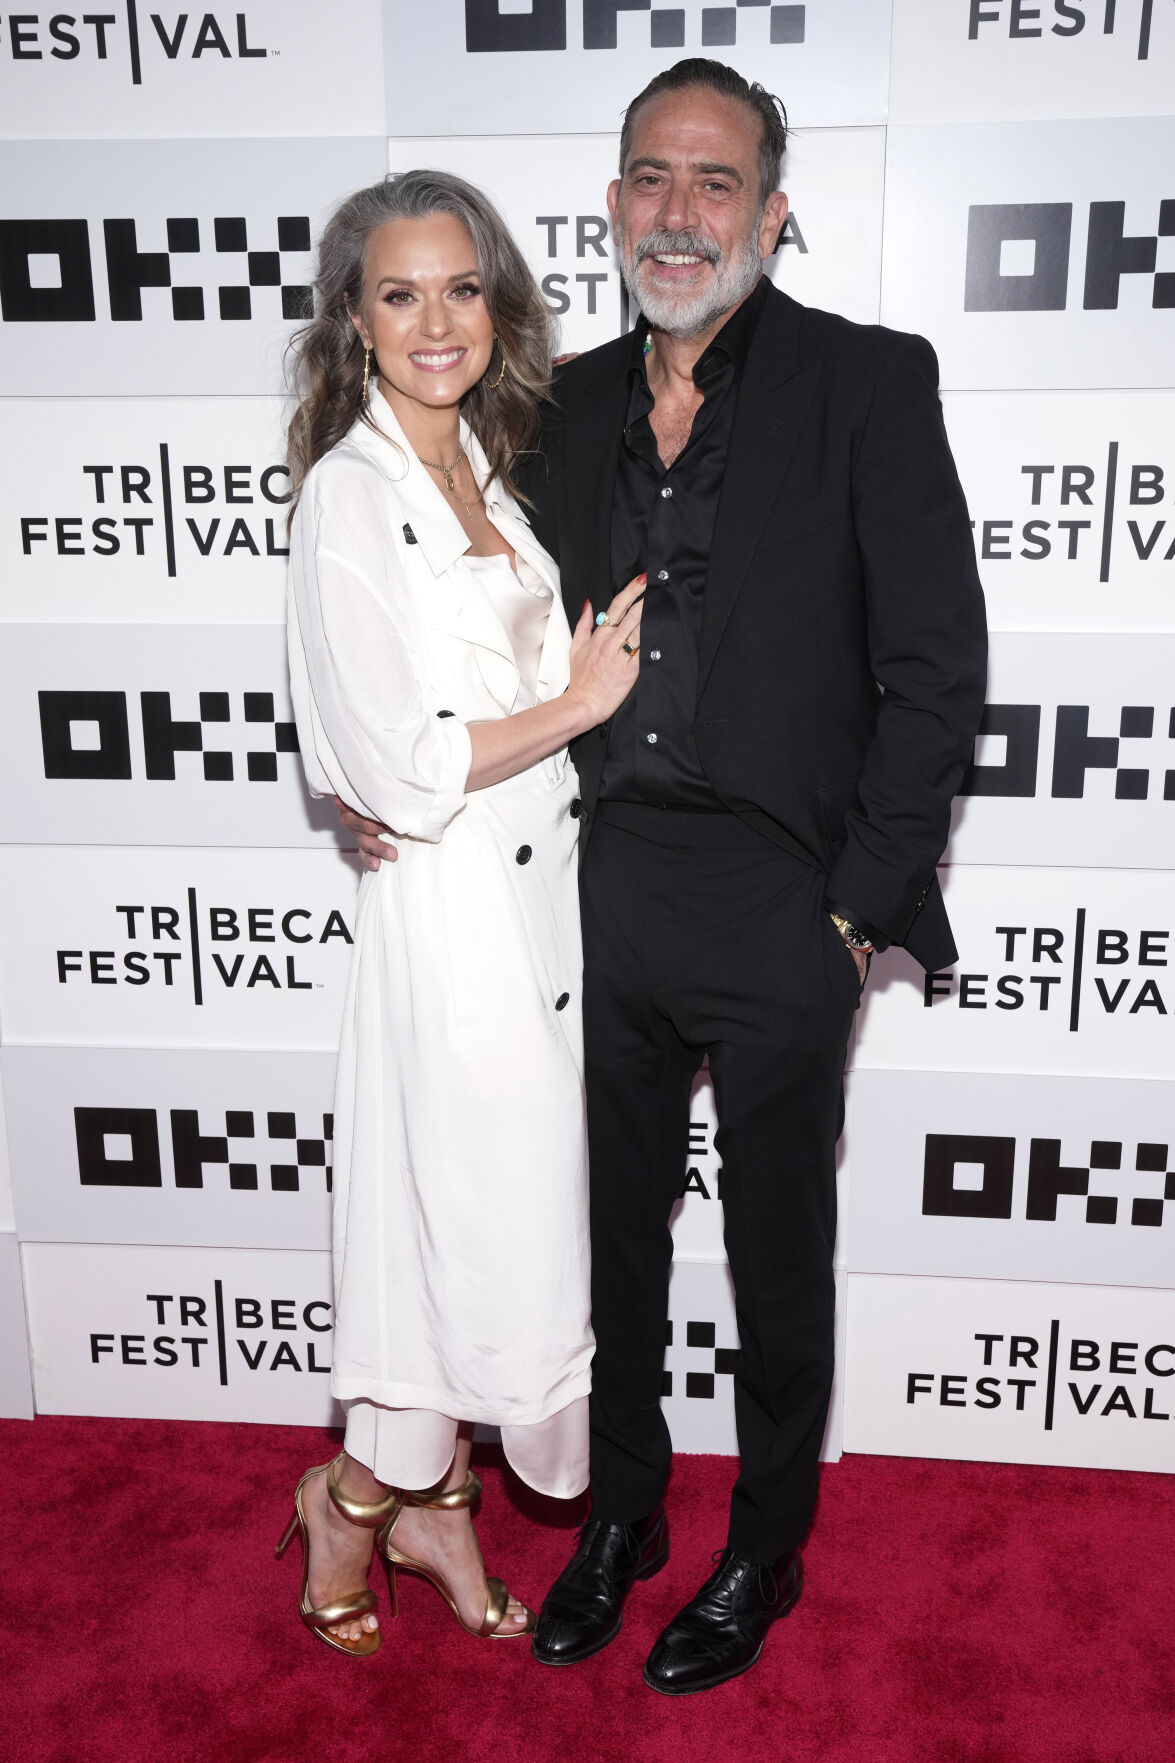 Hilarie Burton Morgan and Jeffrey Dean Morgan attend the premiere of "The Walking Dead: Dead City" at the BMCC Tribeca Performing Arts Center during the Tribeca Festival on Tuesday, June 13, 2023, in New York.